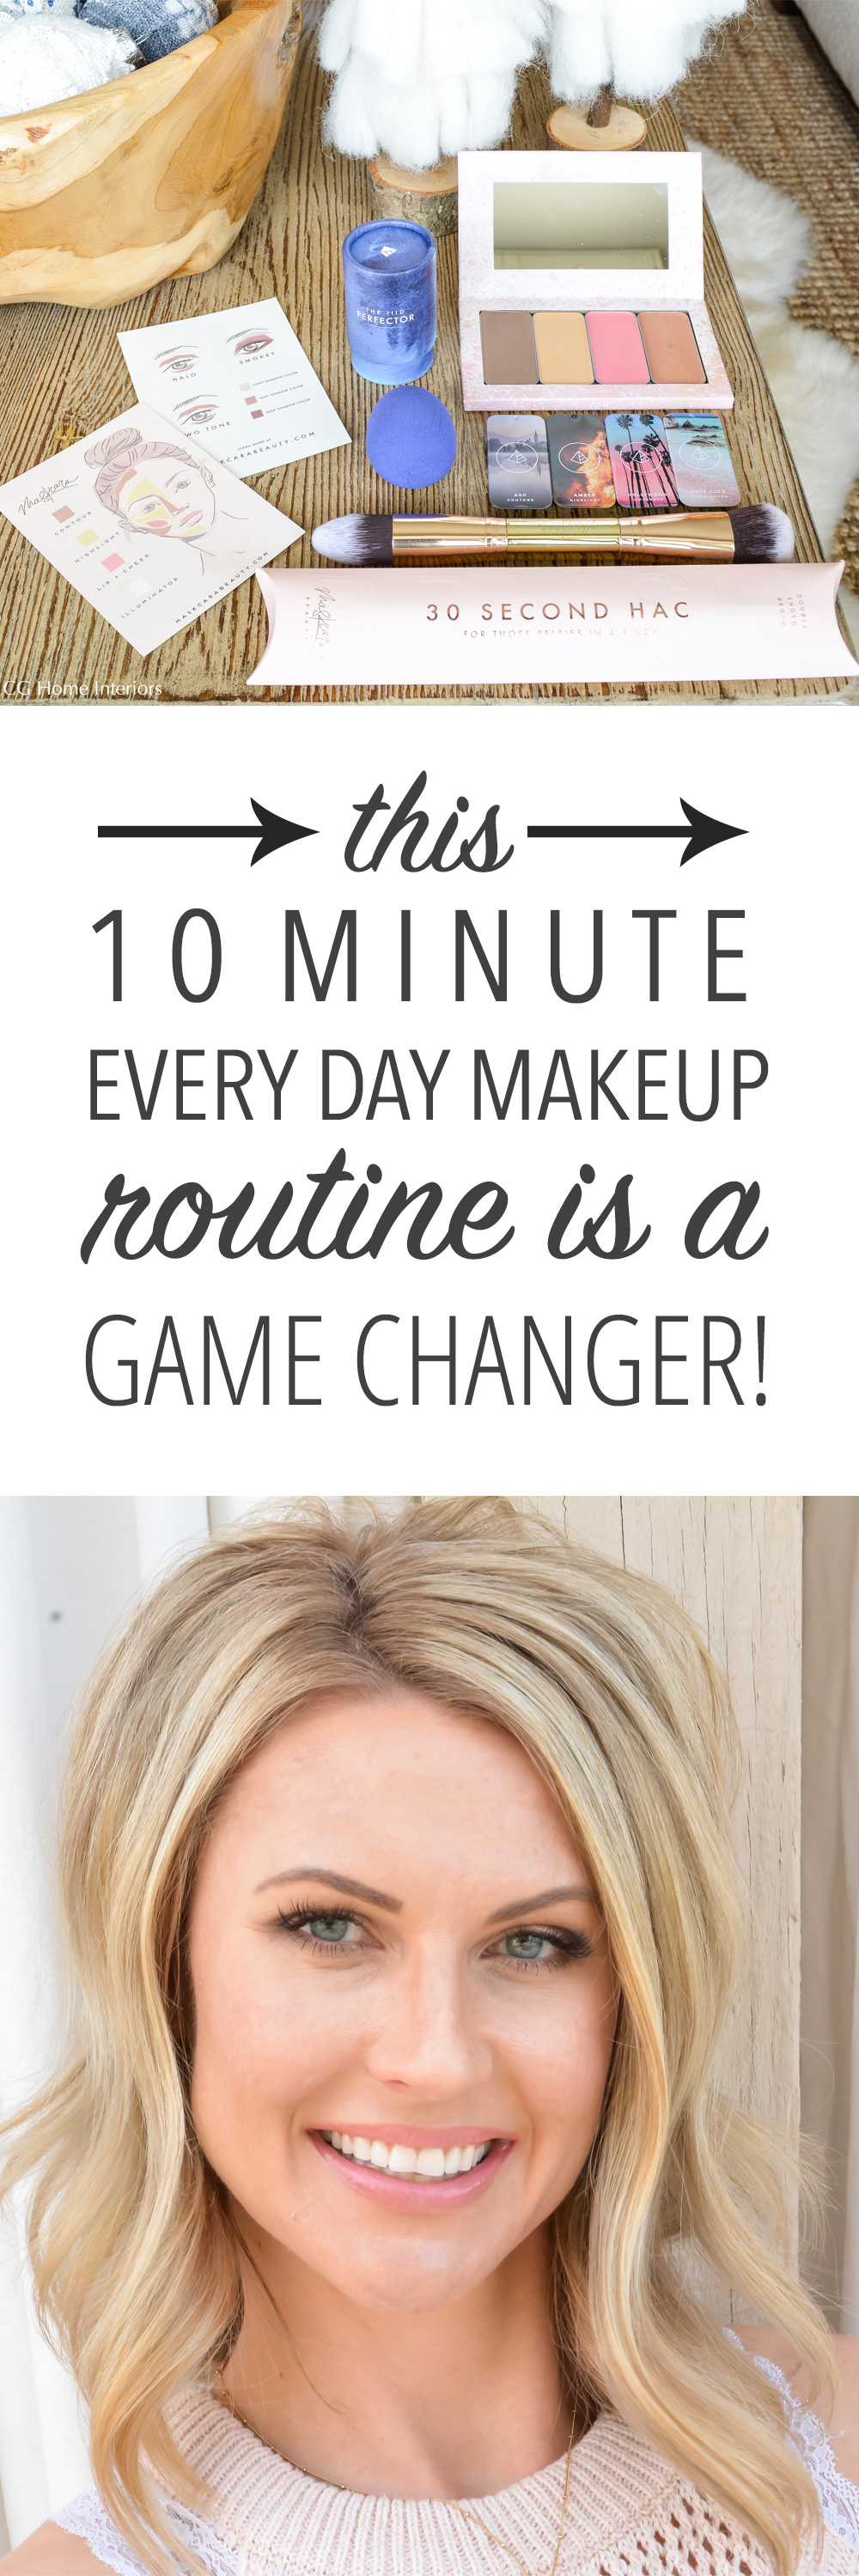 10 Minute Every Day Makeup Tutorial